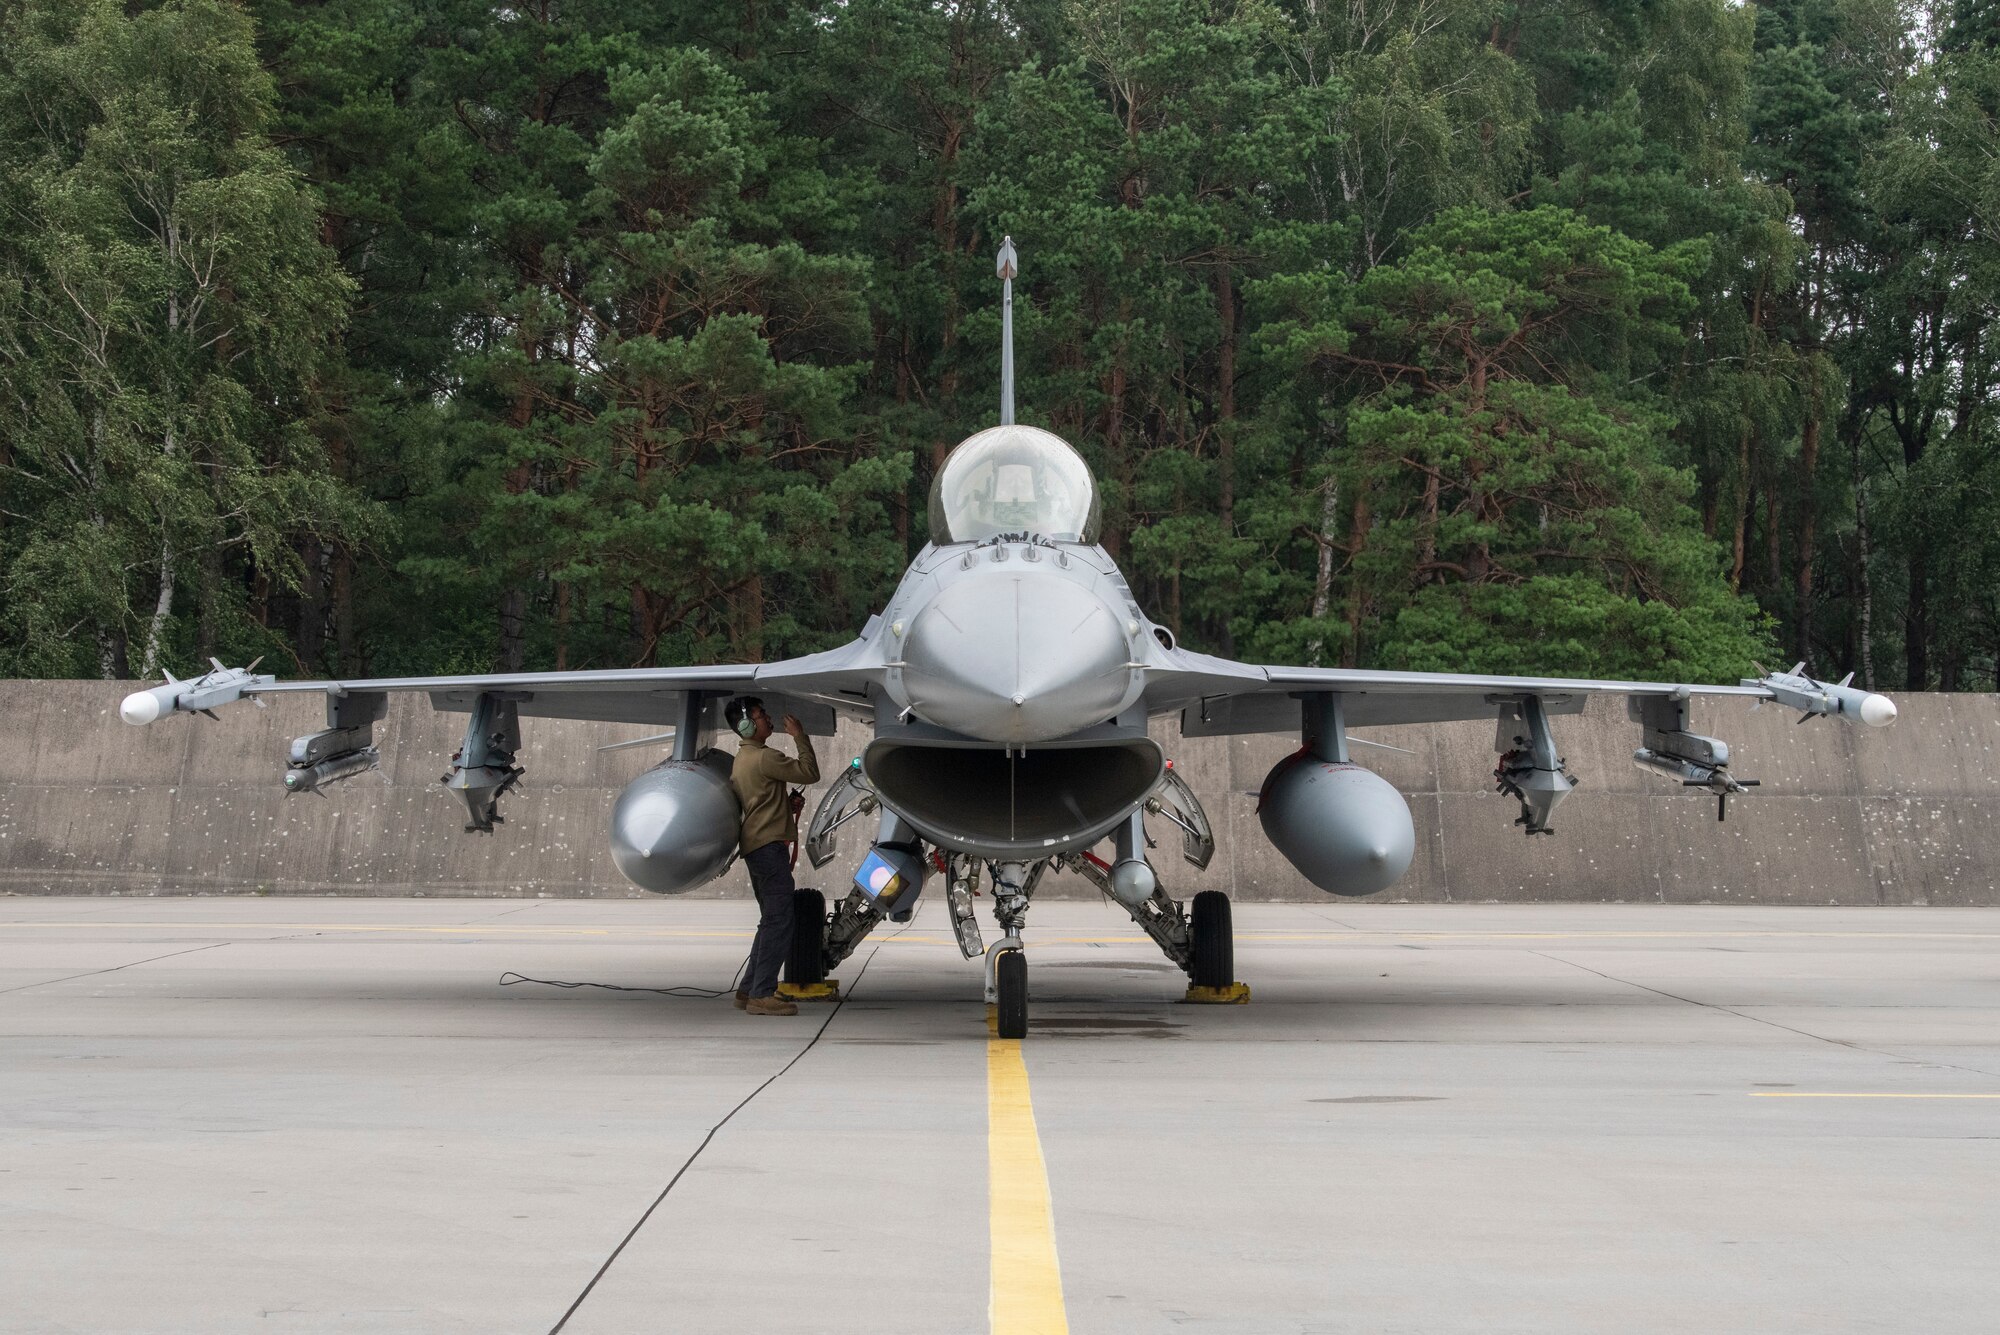 U.S. Air Force Senior Airman Peter Ho, 480th Expeditionary Fighter Squadron crew chief, conducts a pre-flight check of a U.S. Air Force F-16 Fighting Falcon at Łask Air Base, Poland, August 2, 2021. U.S. Air Force F-16 Fighting Falcons and support personnel are in Poland to participate in Aviation Detachment Rotation 21.3. (U.S. Air Force photo by Tech. Sgt. Anthony Plyler)